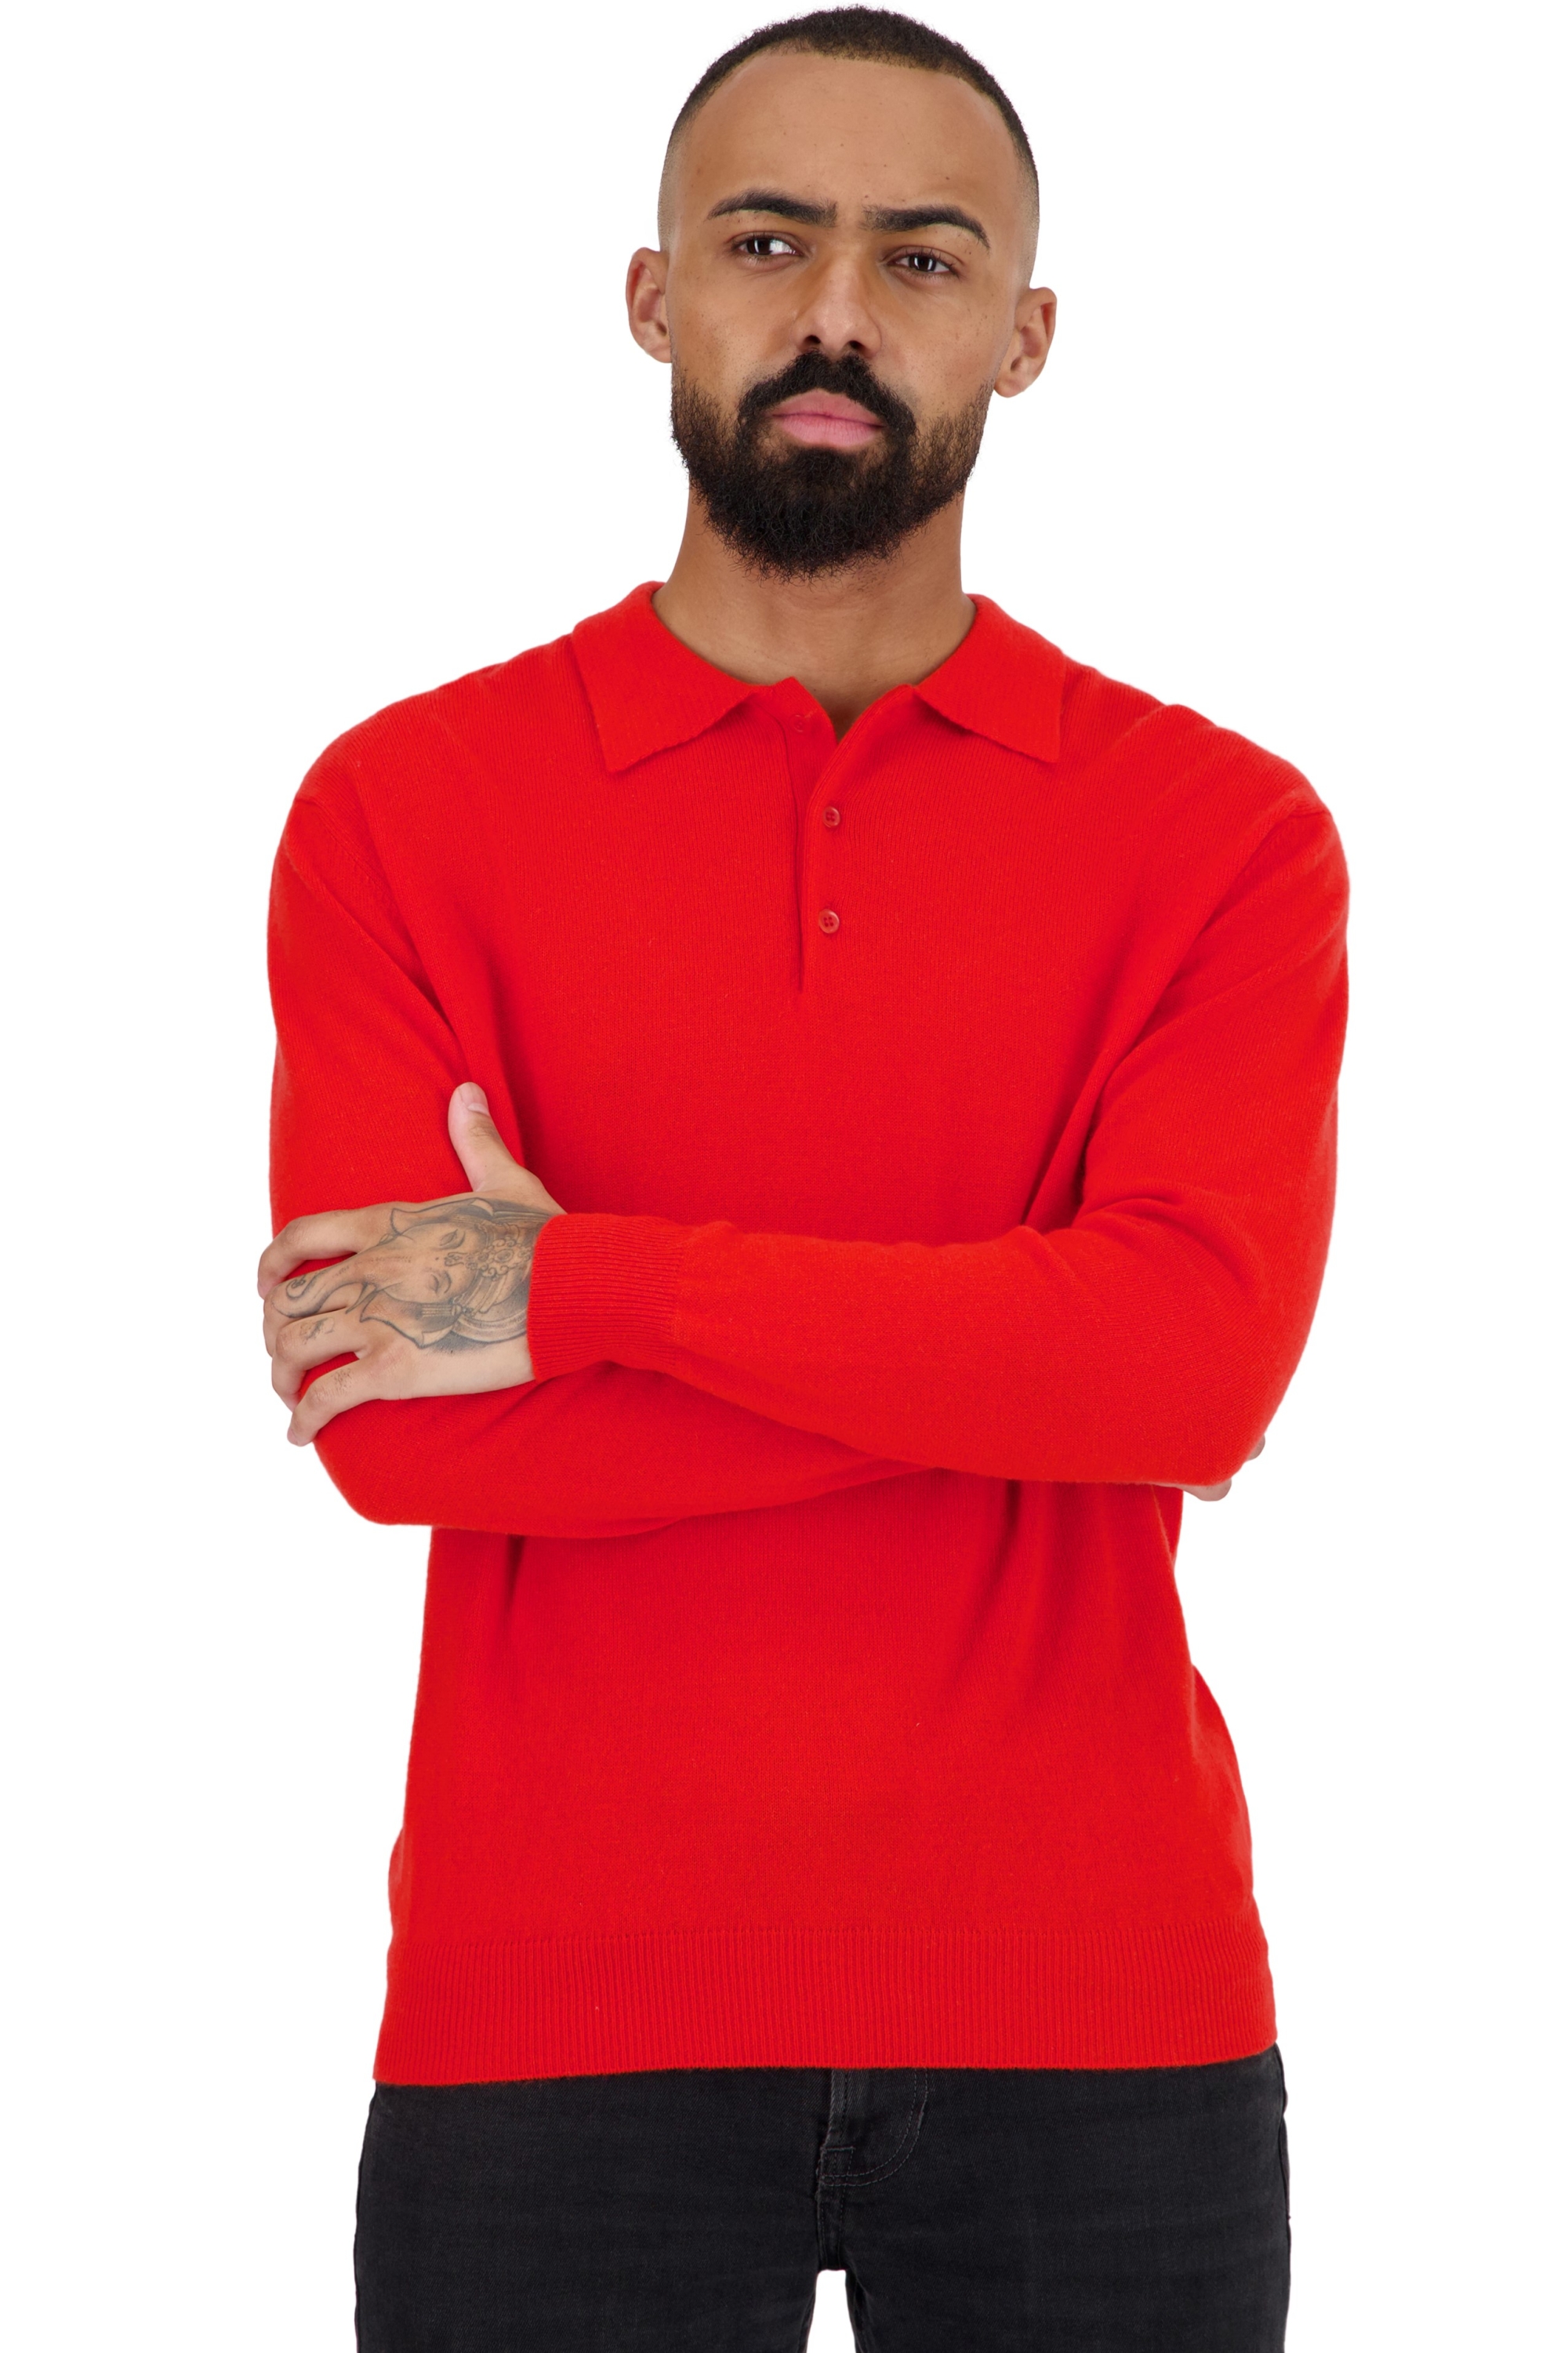 Cashmere men basic sweaters at low prices tarn first tomato 2xl